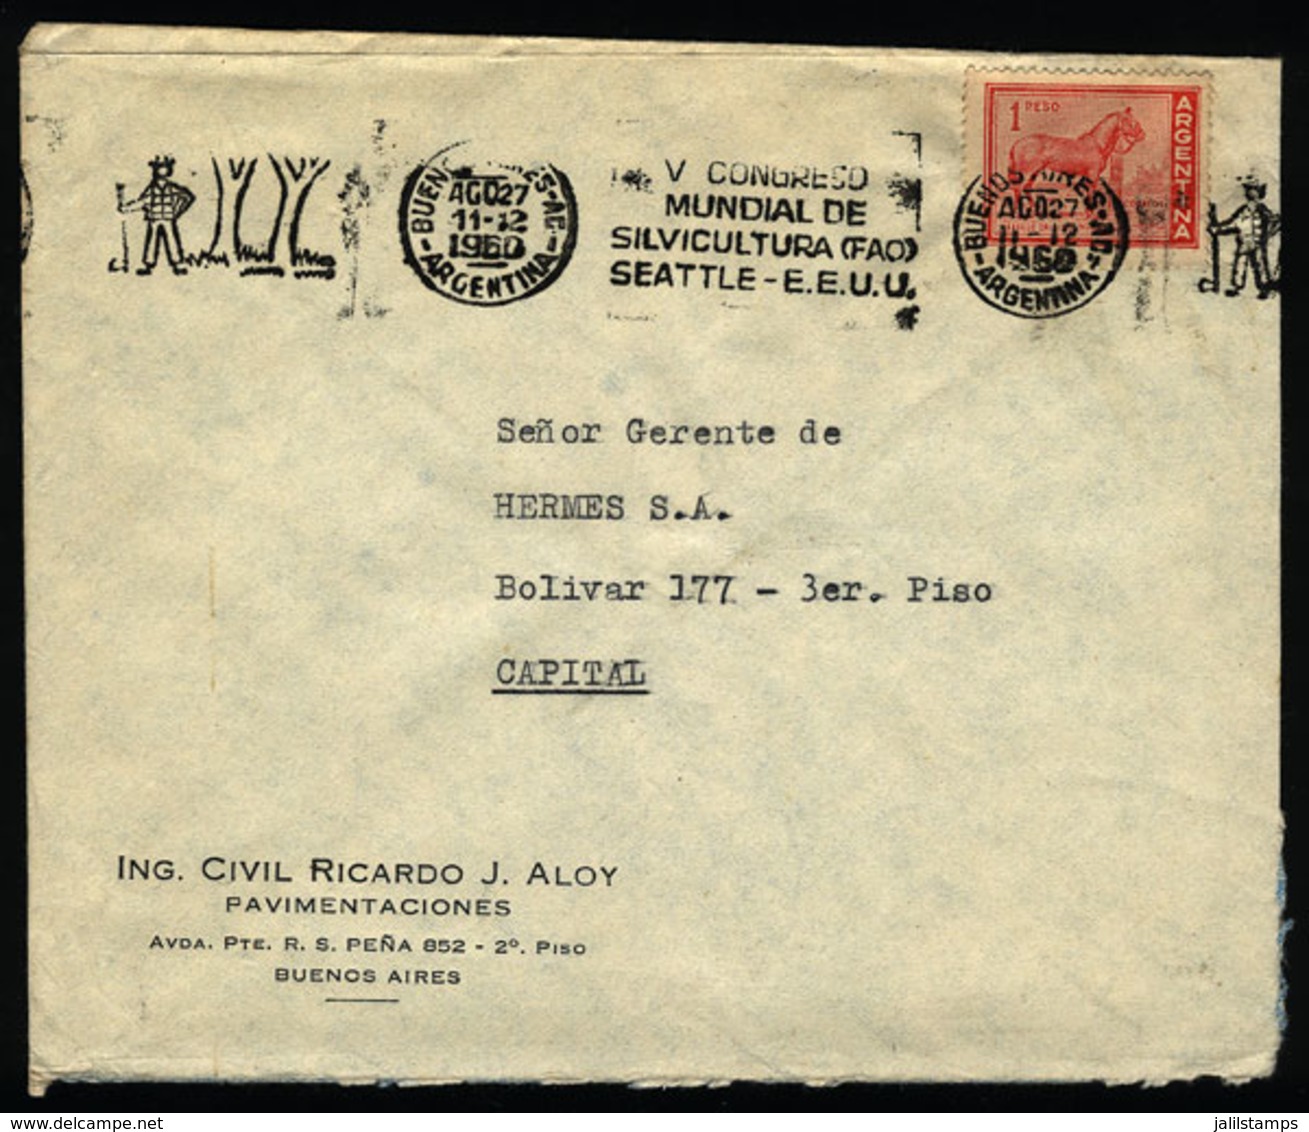 ARGENTINA: Cover Used In Buenos Aires On 27/AU/1960, With Slogan Cancel "Intl. Congress Of Forestry - Seattle USA", VF Q - Covers & Documents